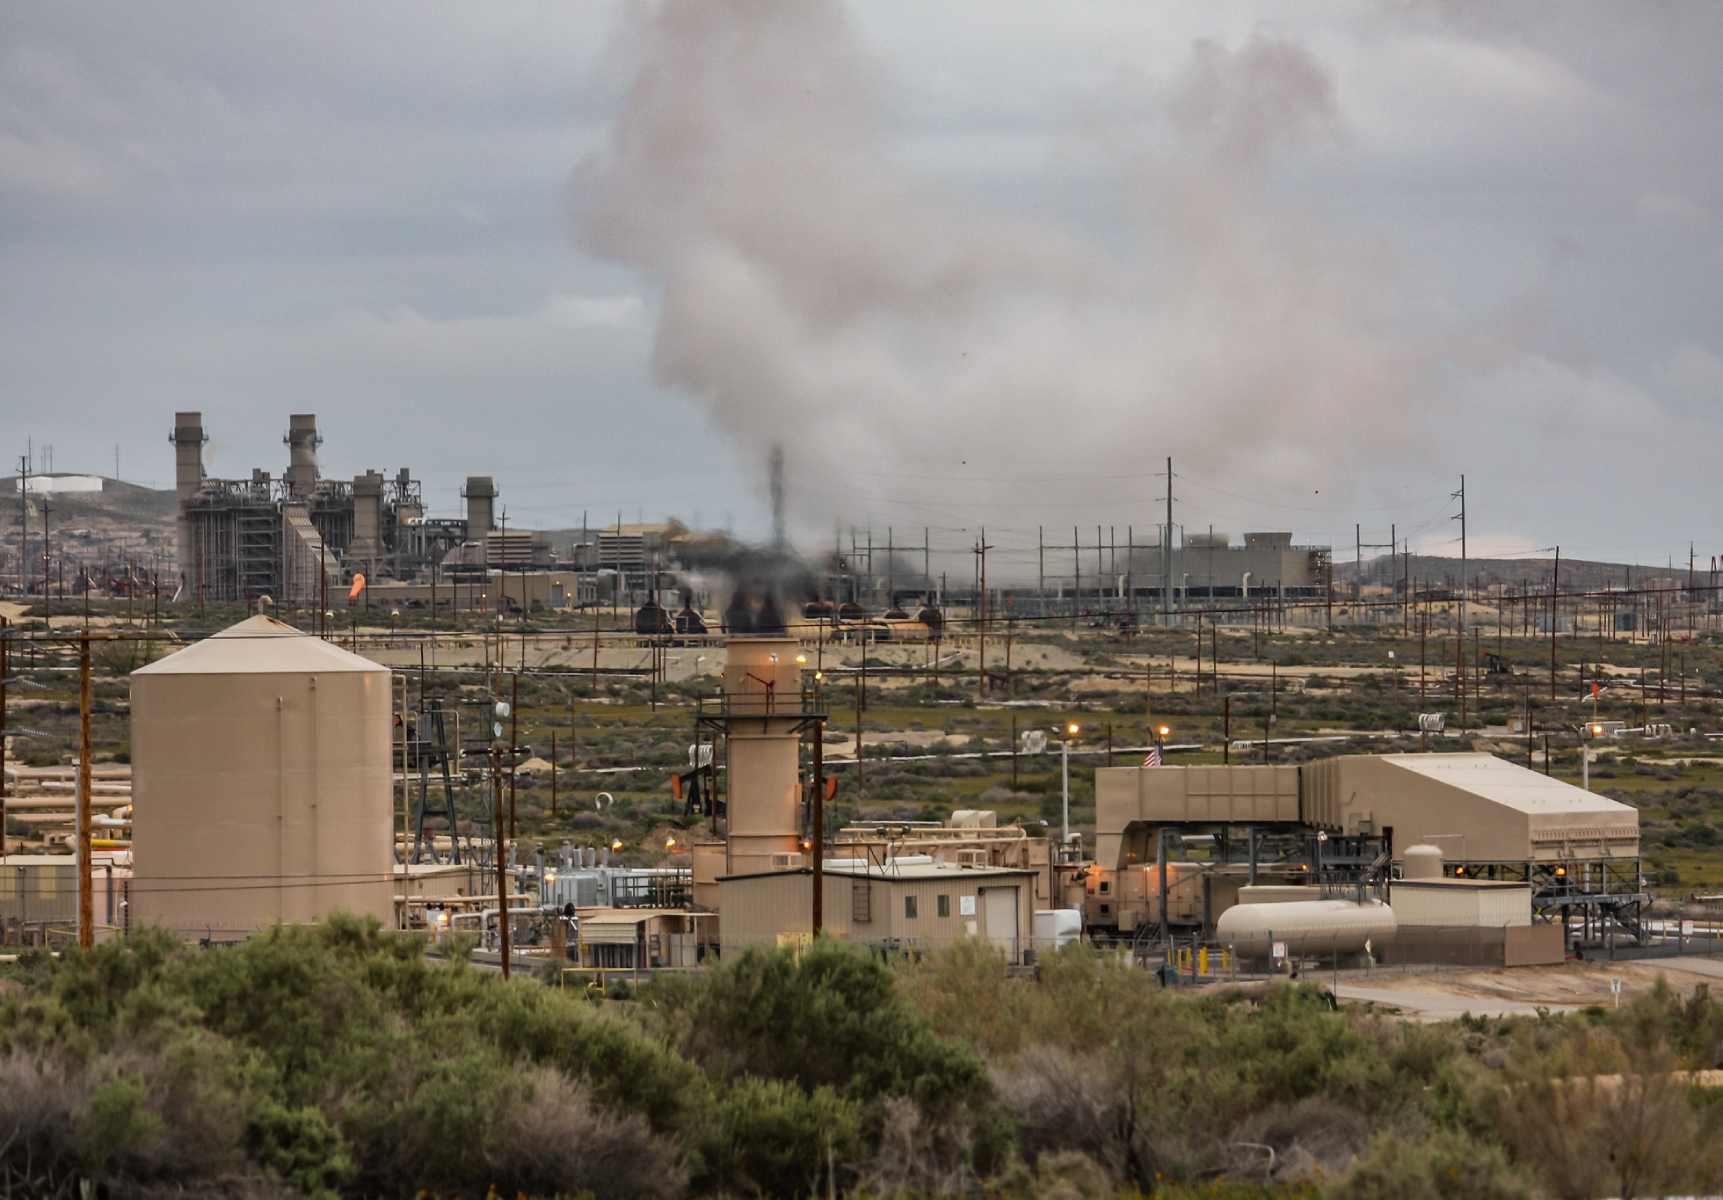 Overview of natural gas plant in California